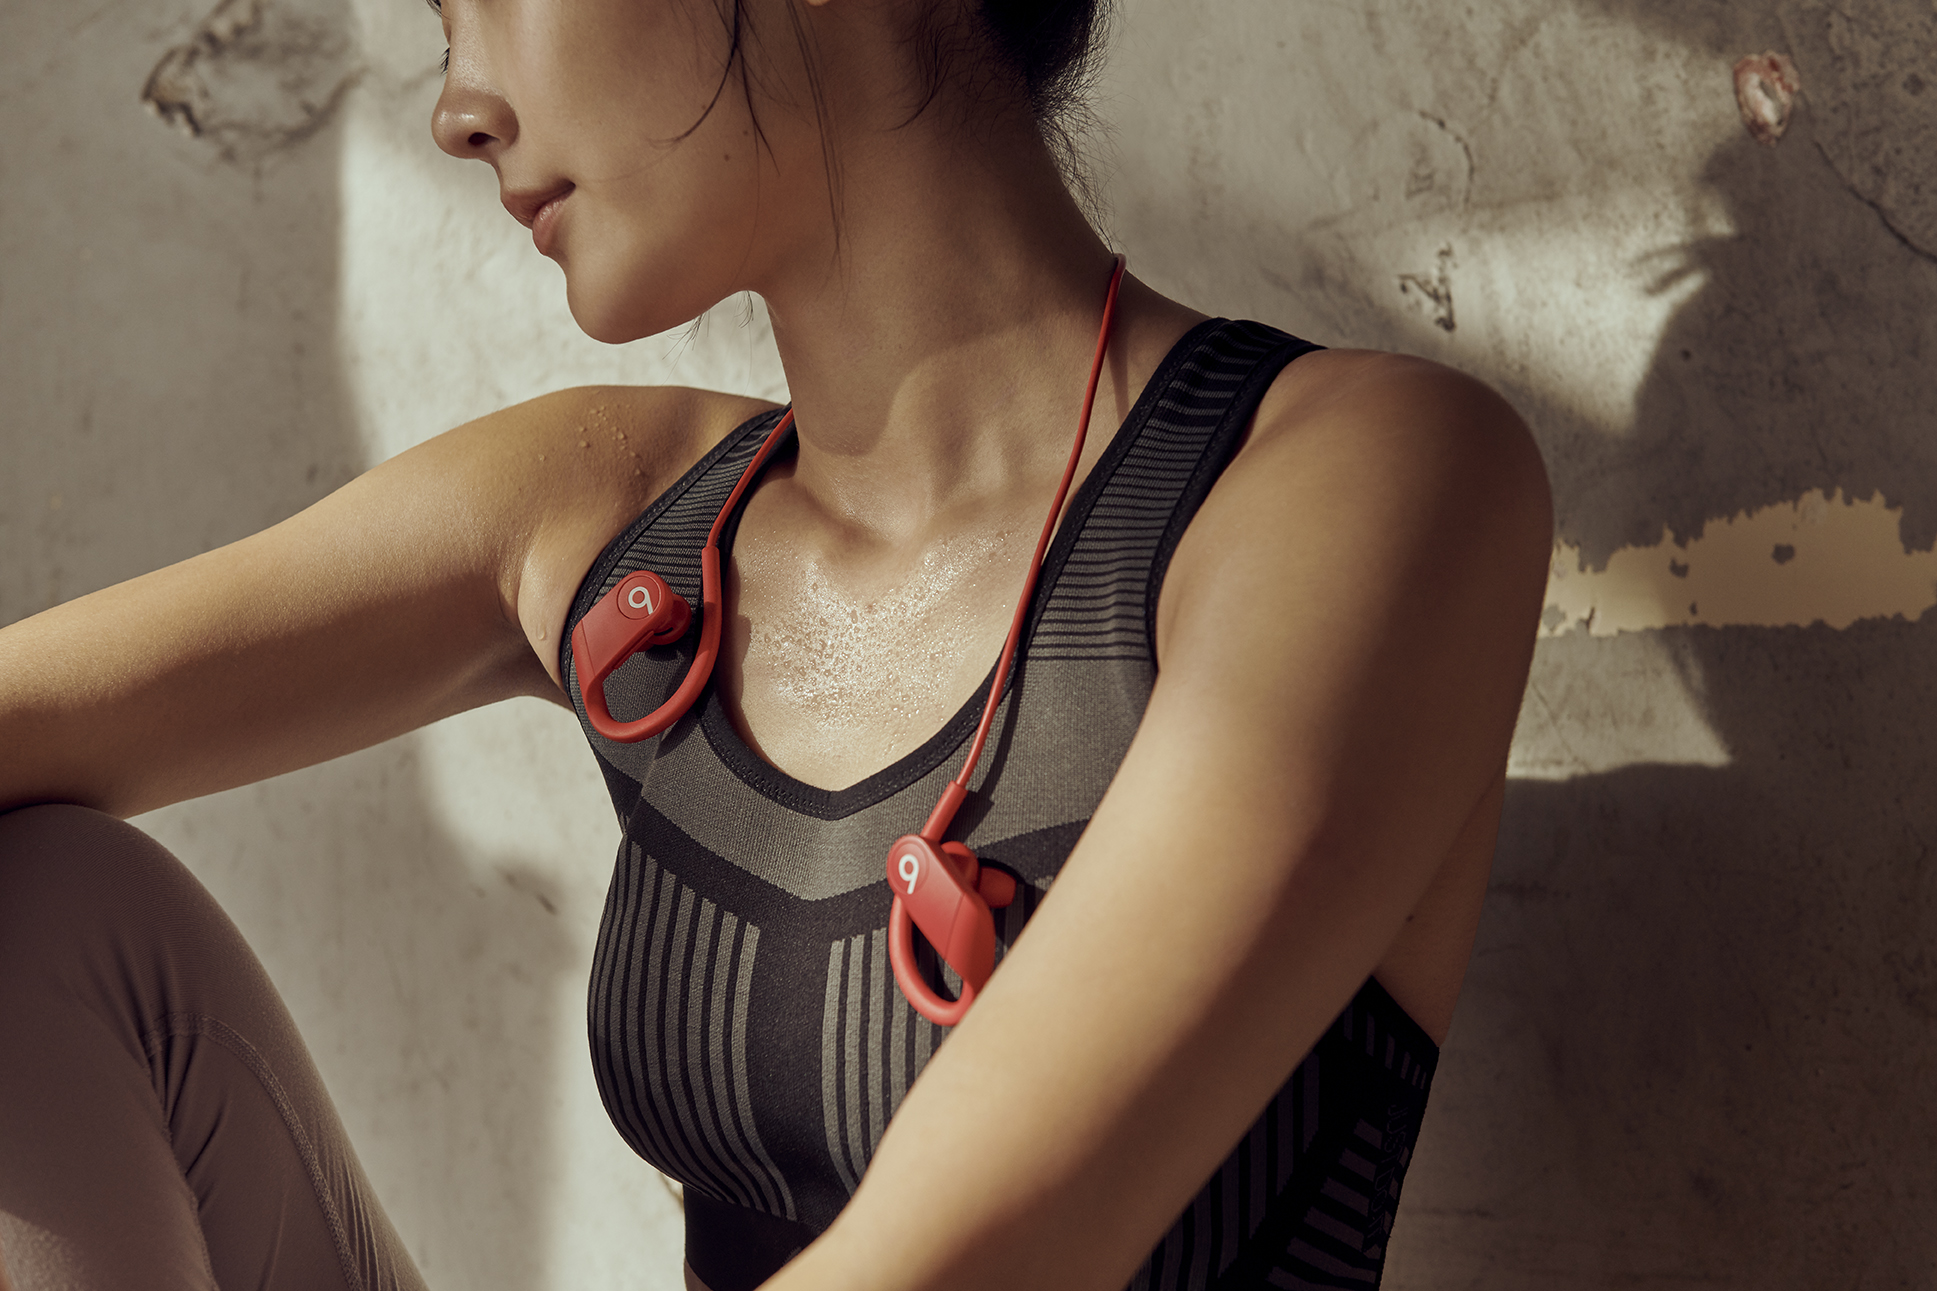 Lifestyle image of a woman wearing the Apple Powerbeats in red.